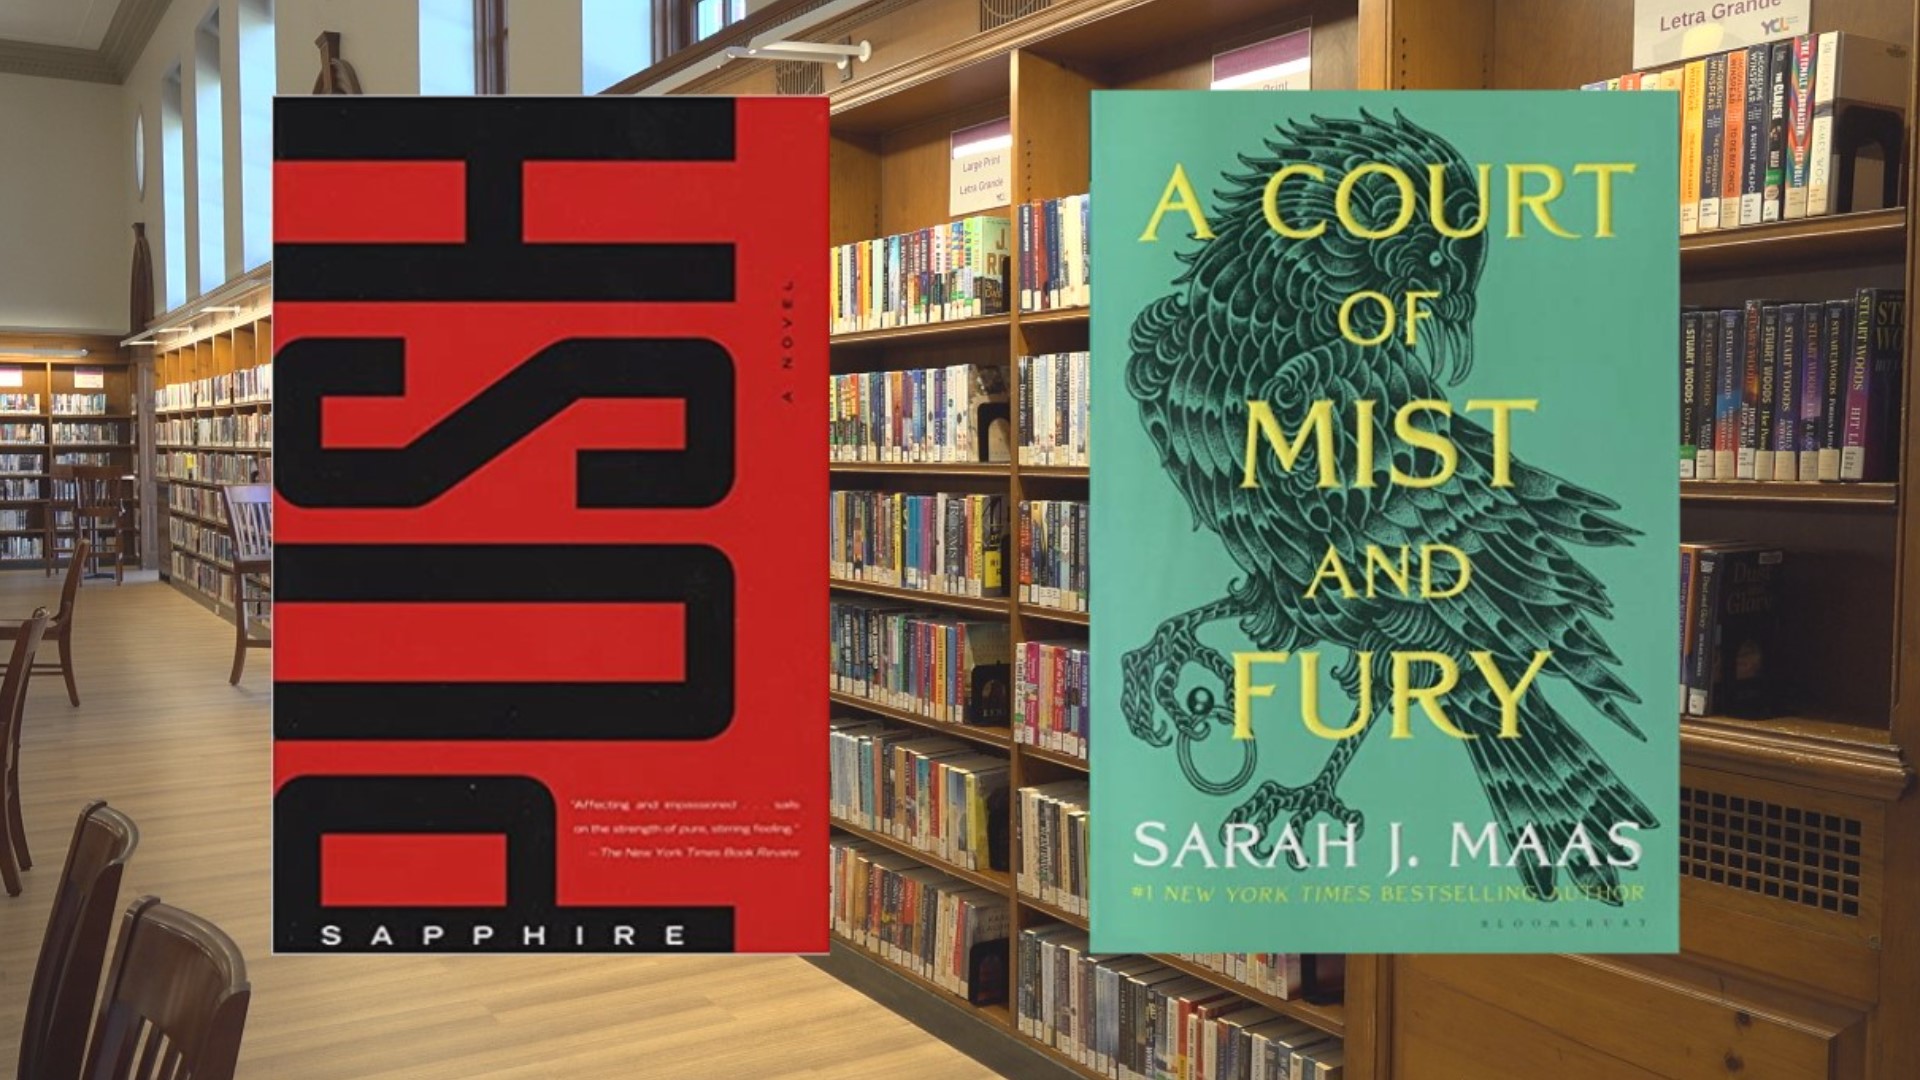 "Push" by Sapphire and "A Court of Mist and Fury" by Sarah J. Mass were both removed from shelves following complaints of sexual content.